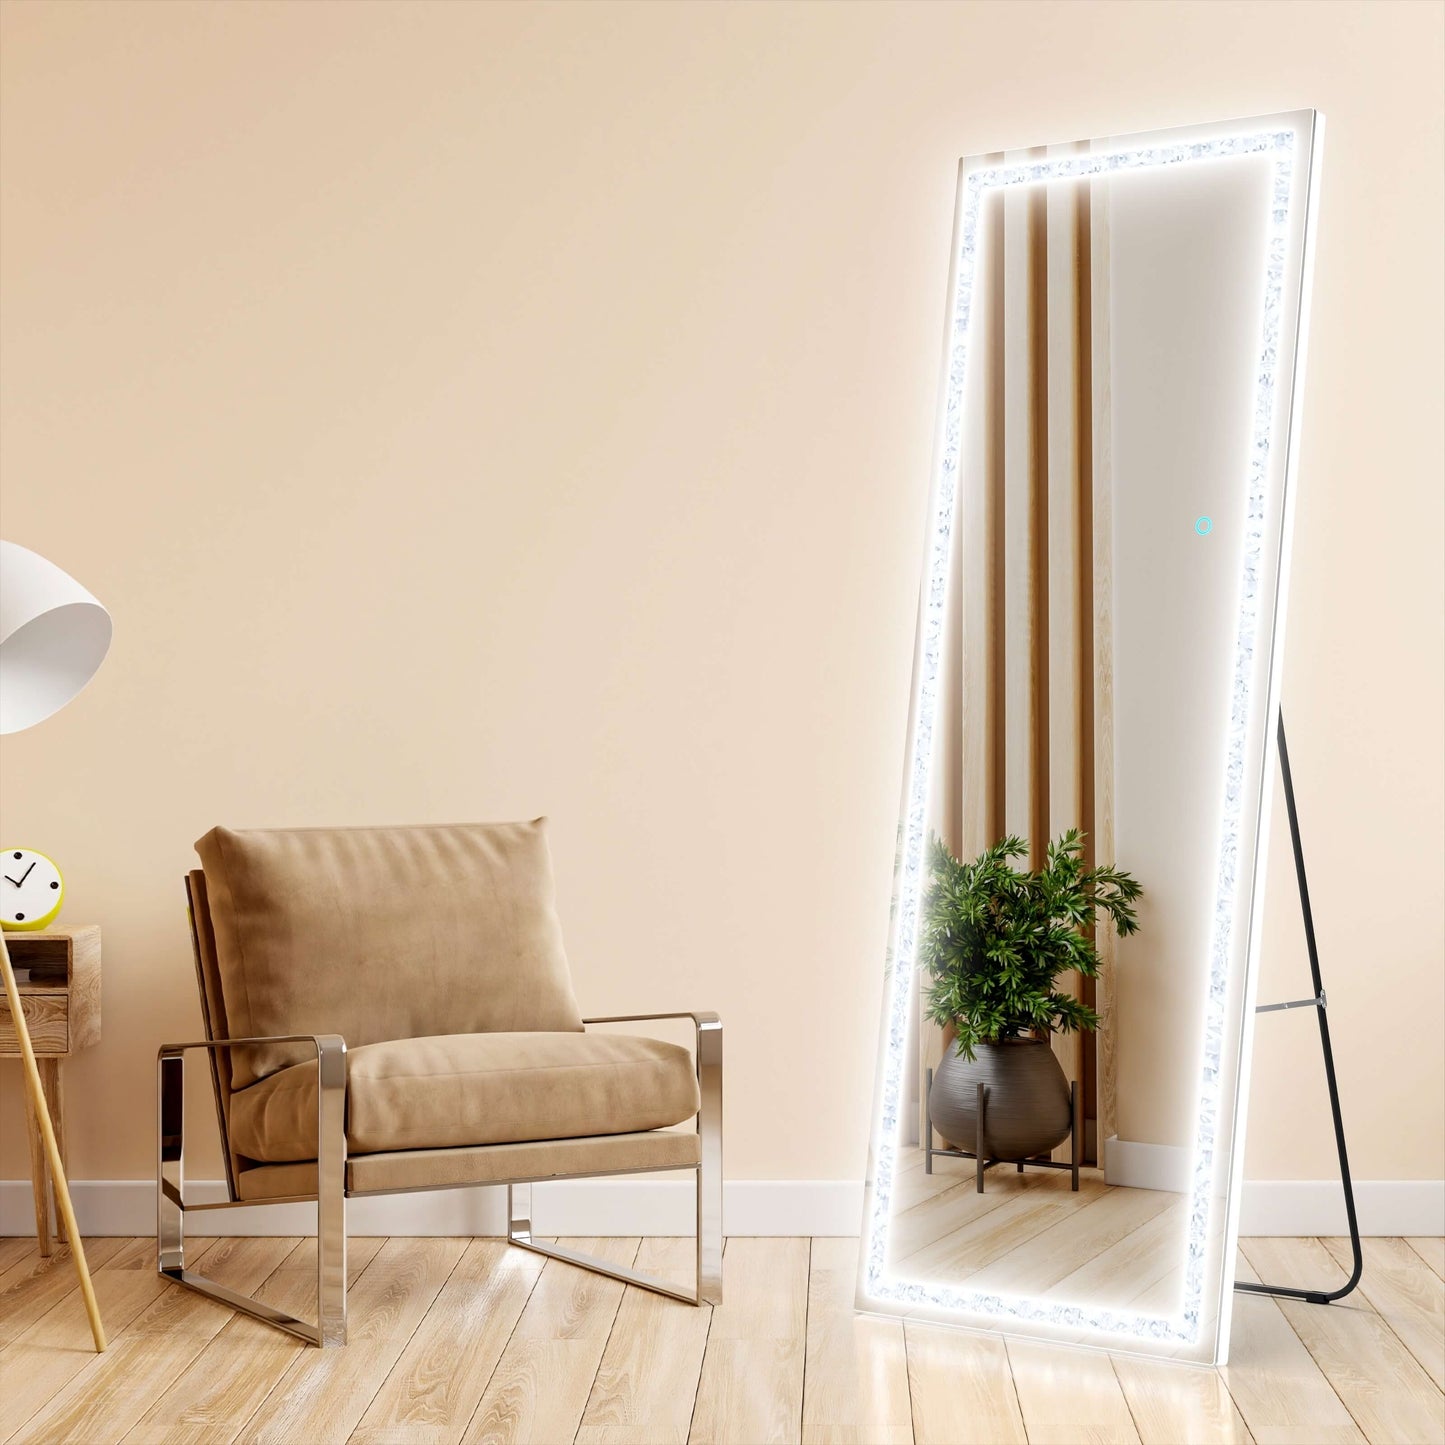 WETA® Upgraded  Deluxe Diamond 63" x 20" Full Body LED Mirror, White Free Standing Mirror, Wall Mounted Hanging Mirror Touch Control